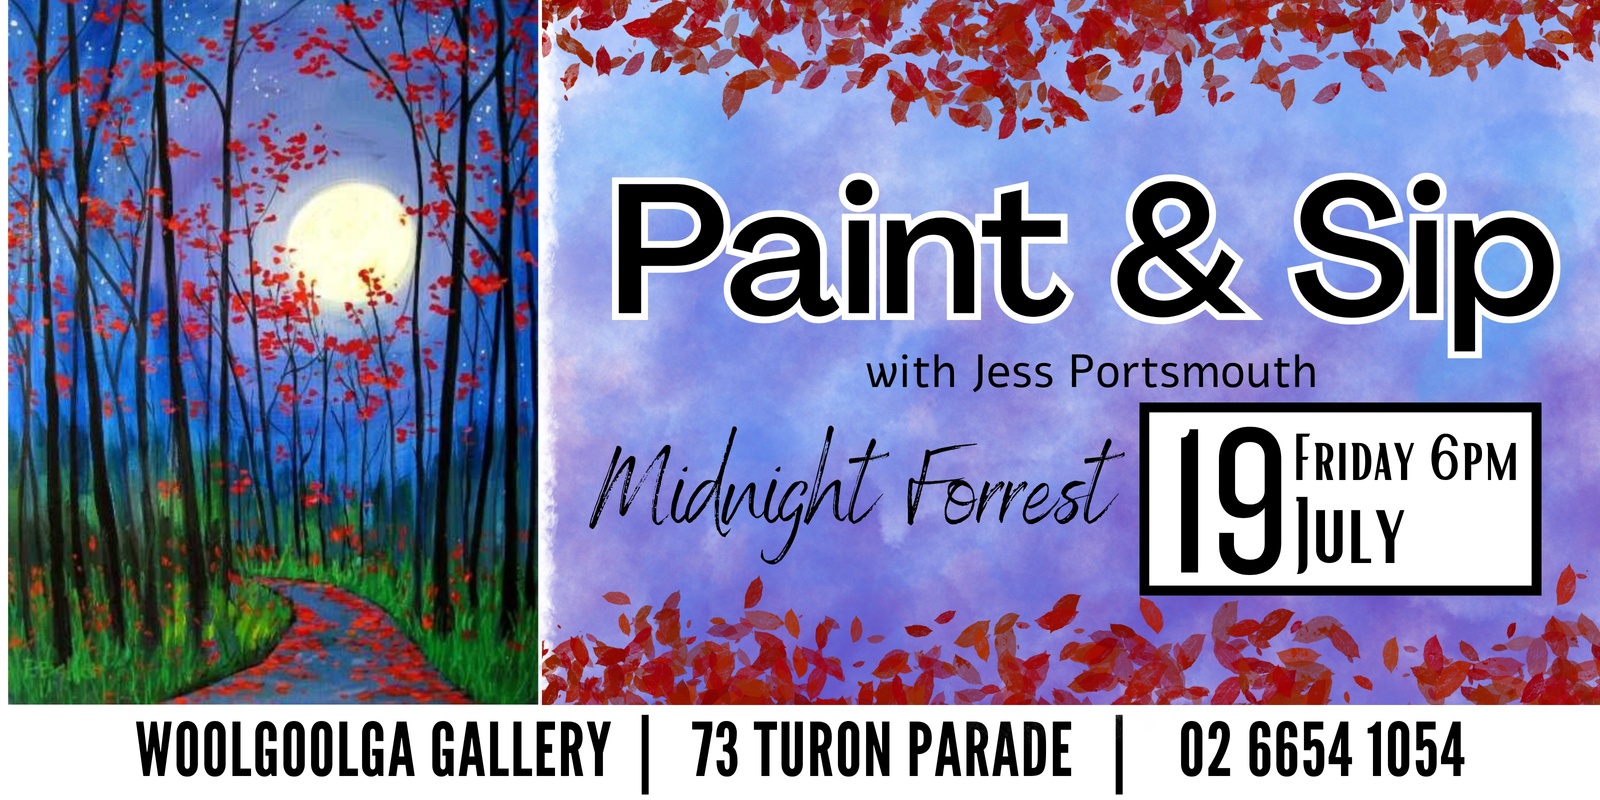 Banner image for Midnight Forrest - Paint & Sip @Woolgoolga Gallery with Jess Portsmouth